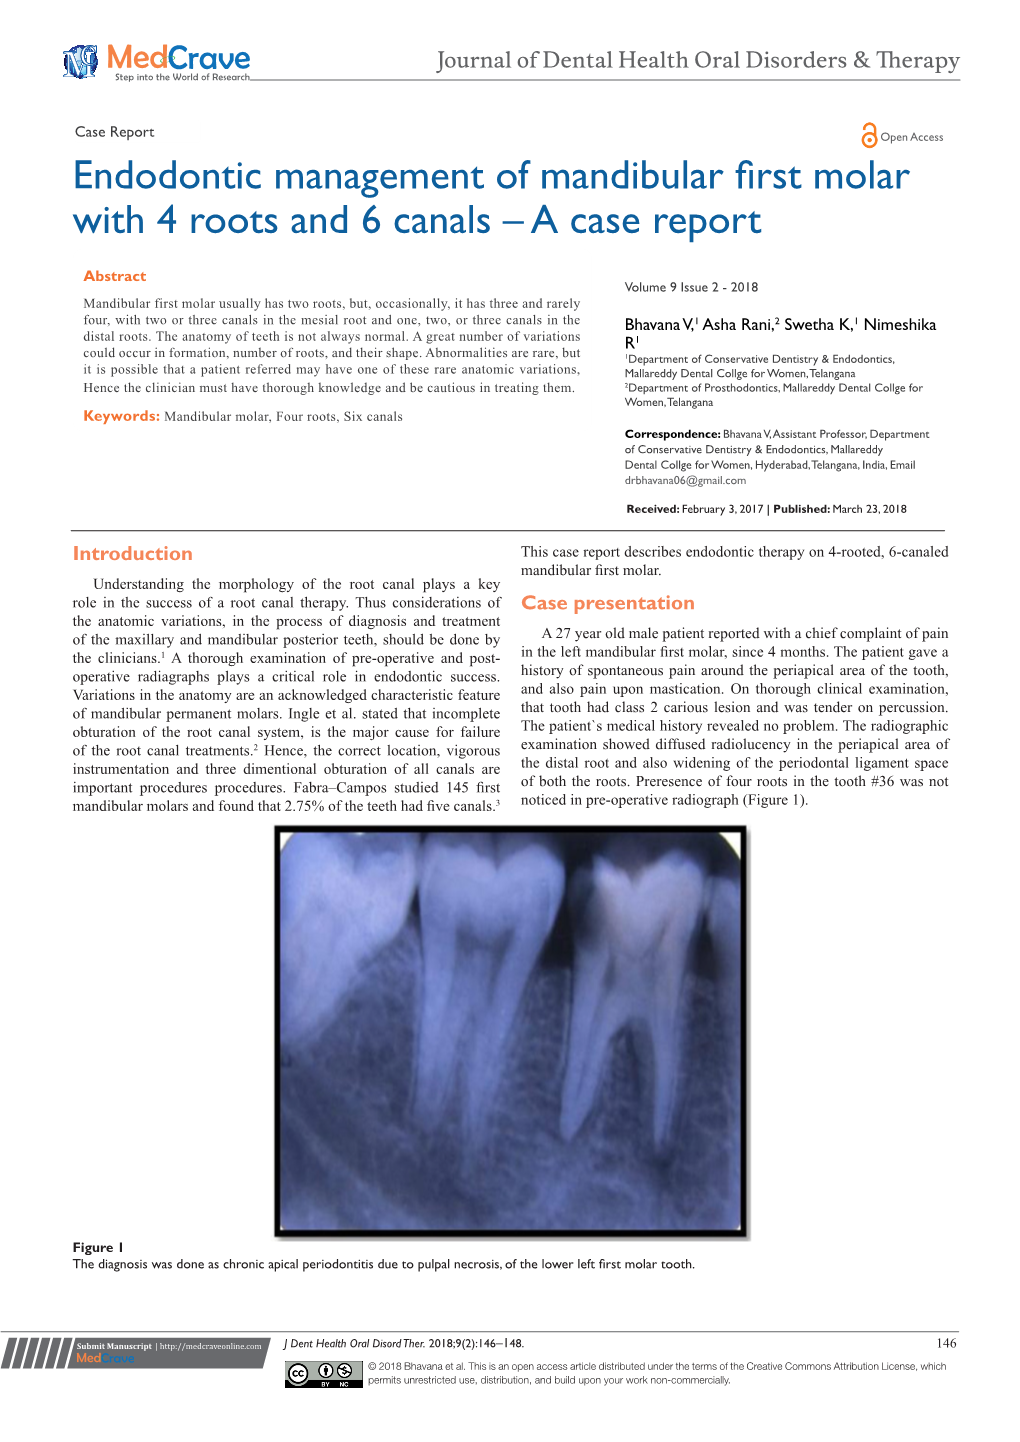 Endodontic Management of Mandibular First Molar with 4 Roots and 6 Canals – a Case Report